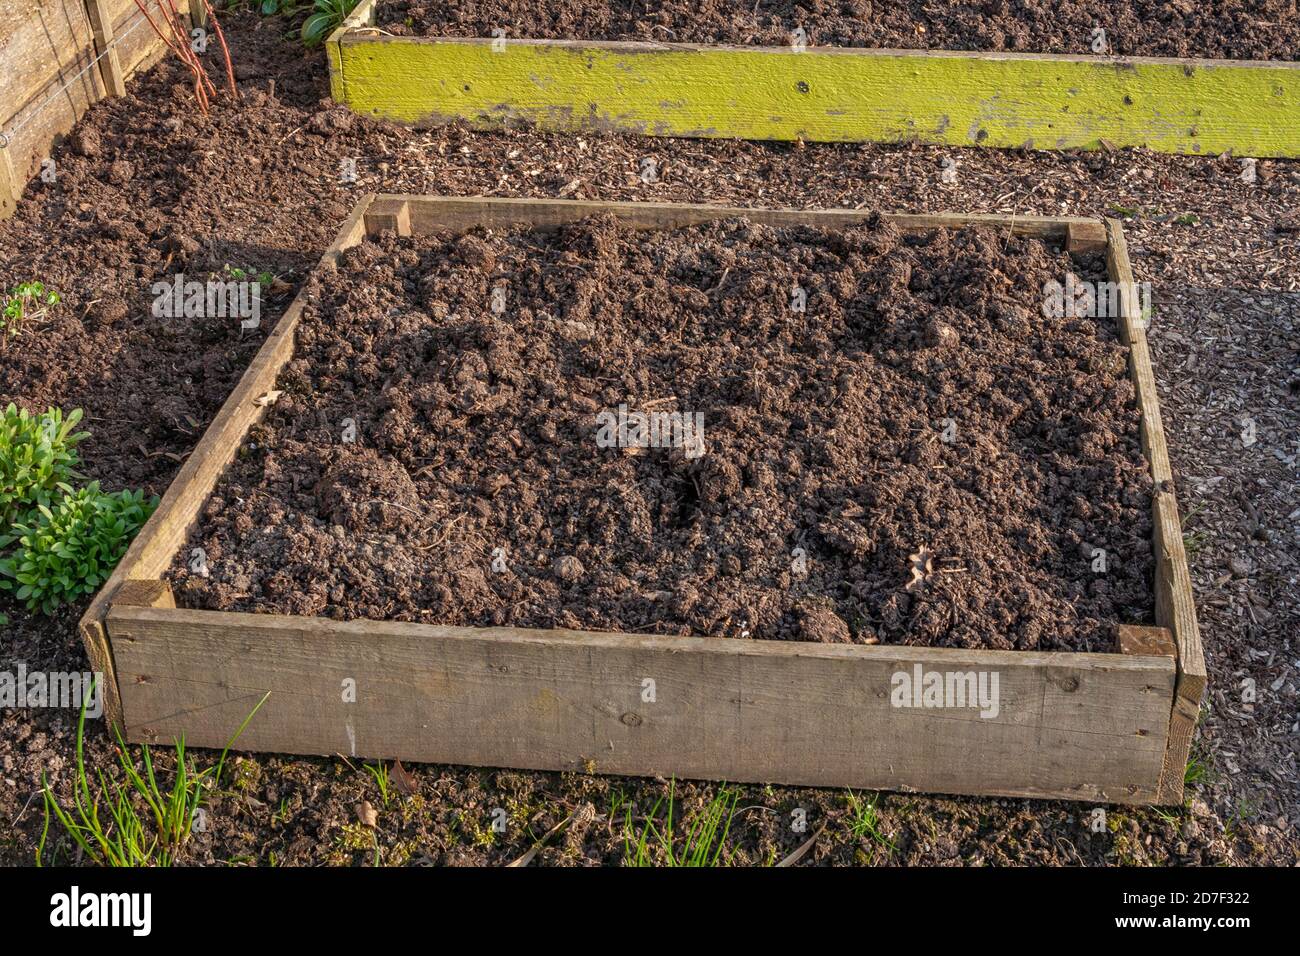 Timber raised beds in the garden. Stock Photo